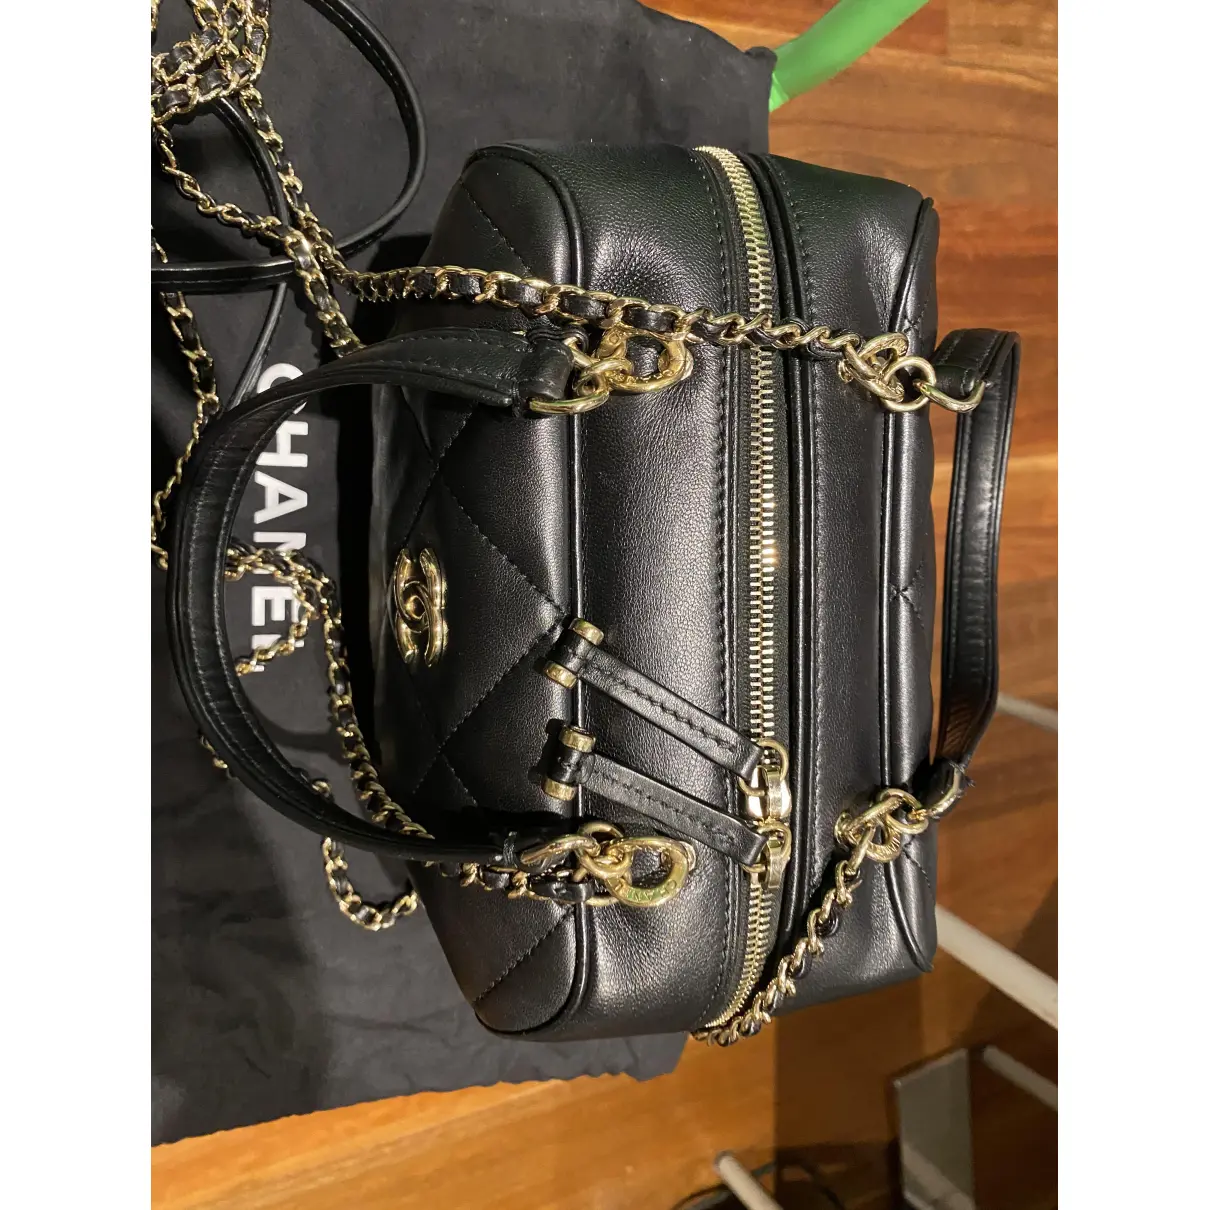 Buy Chanel Bowling Bag leather bowling bag online